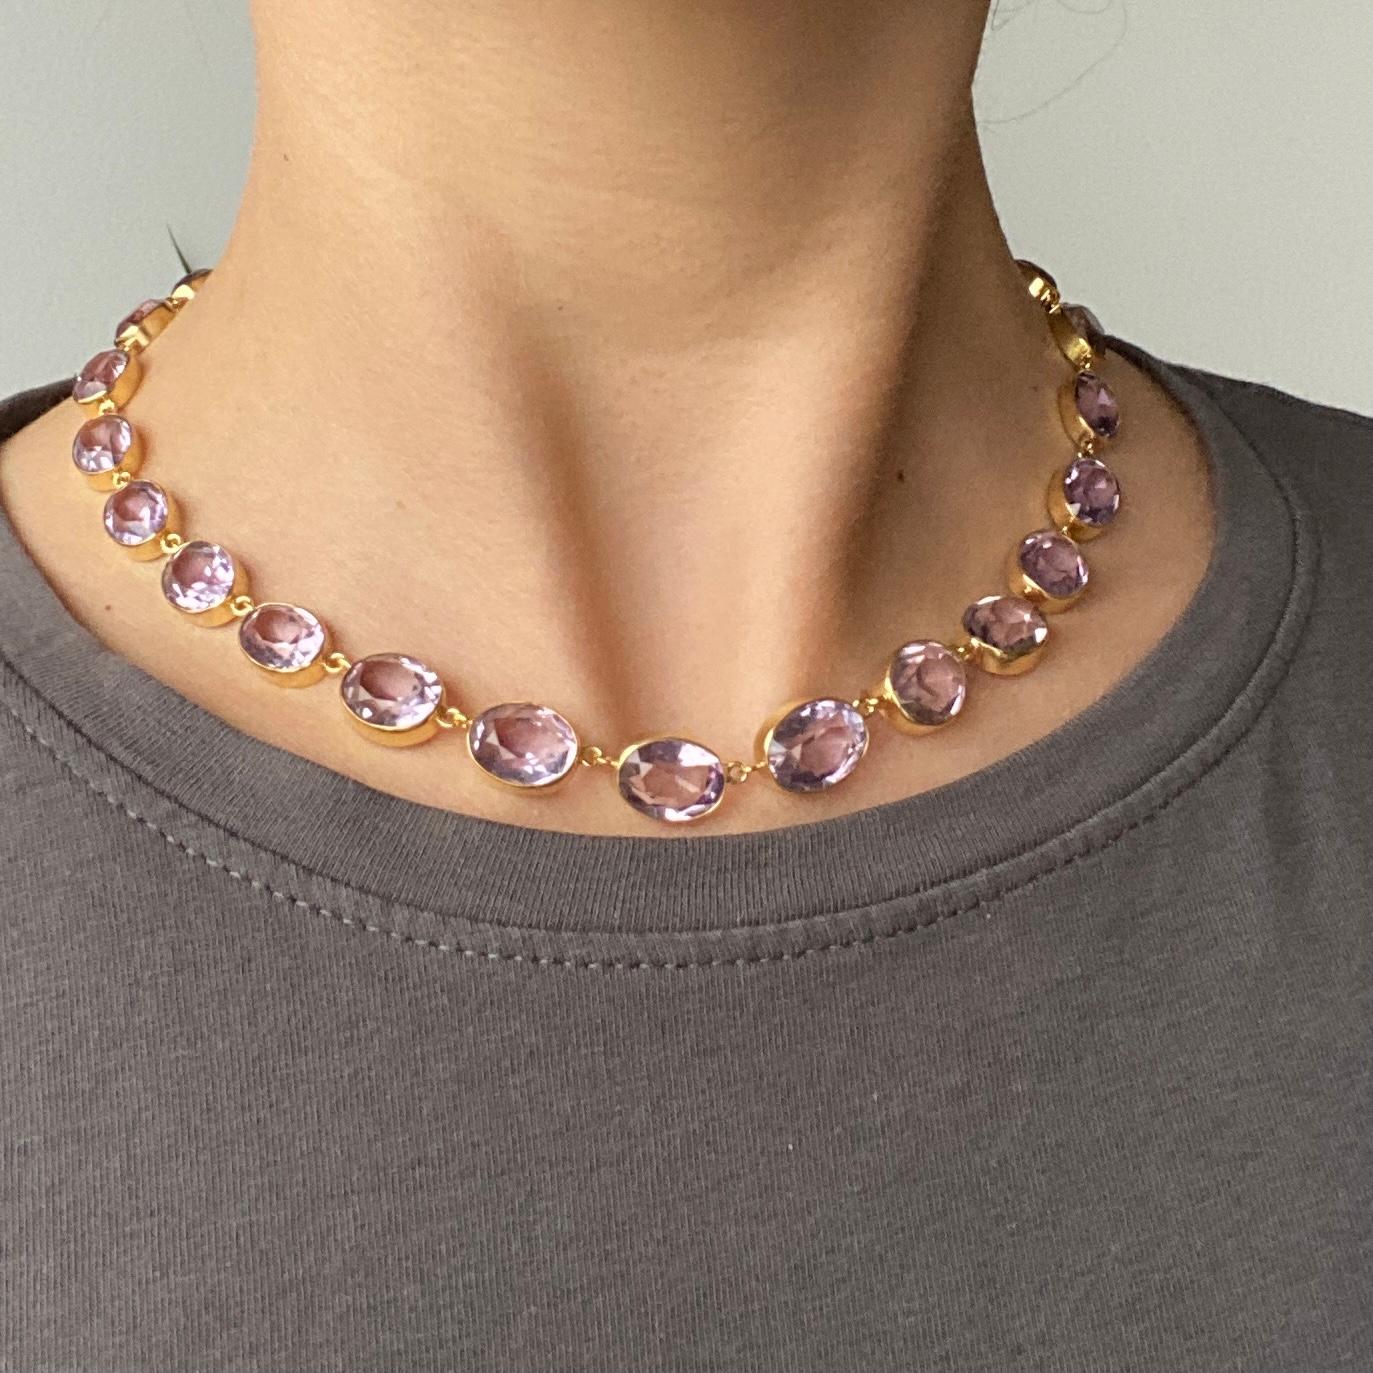 The amethyst stone are a pale purple colour which sit beautifully with the silver gilt simple settings. The stones slightly graduate in size from the centre of the necklace to the fastening. 

Length: 40cm 
Stone Dimensions: 10x13mm - 8x6mm

Weight: